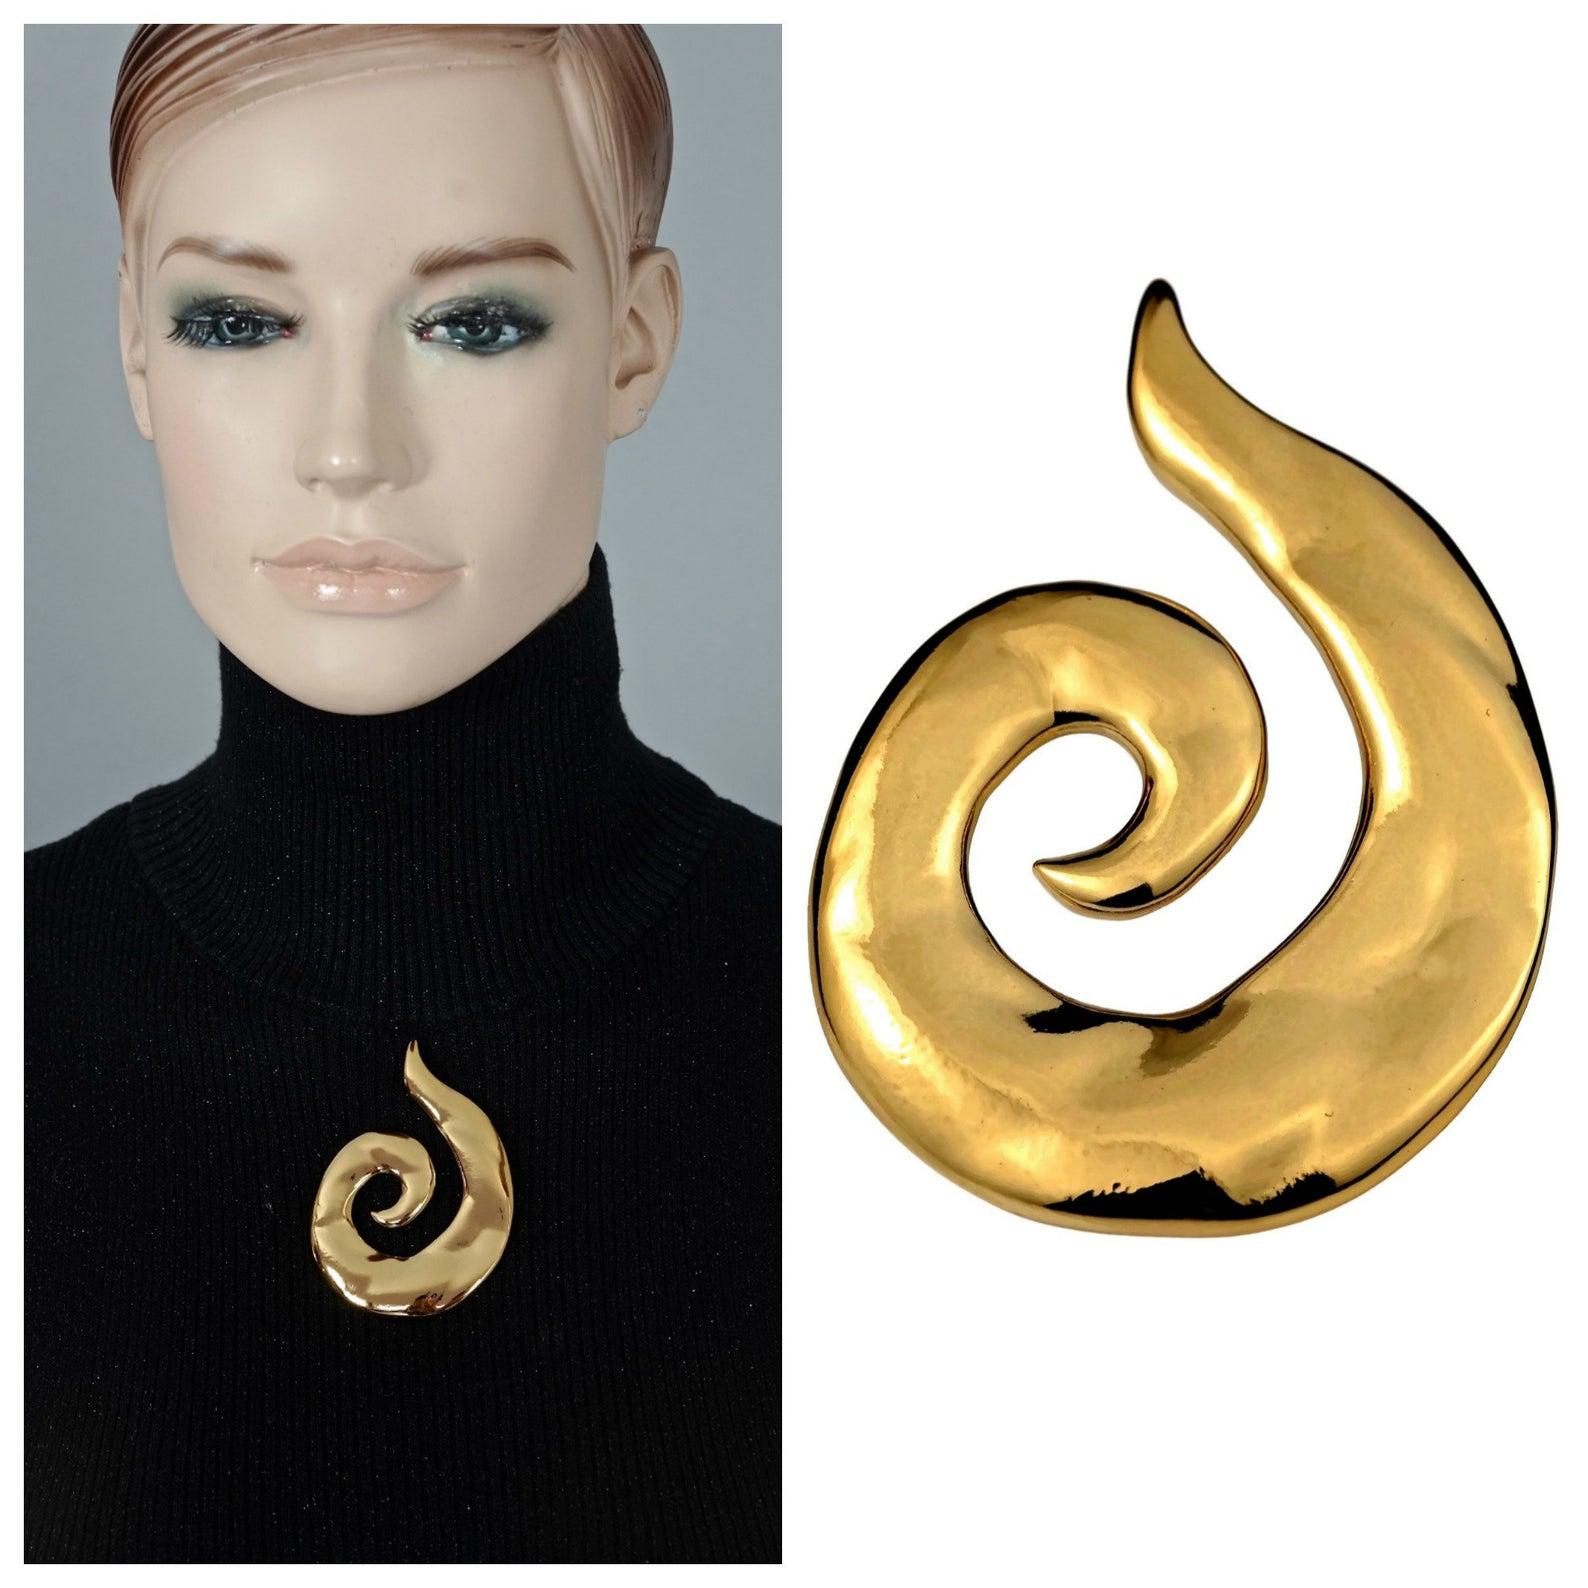 Vintage YVES SAINT LAURENT Ysl Coiled Spiral Brooch

Measurements:
Height: 3.03 inches (7.7 cm)
Width: 5.4 inches (5.4 cm)

Features:
- 100% Authentic YVES SAINT LAURENT.
- Coiled spiral hammered gilt brooch.
- Gold tone.
- Signed YSL Made in